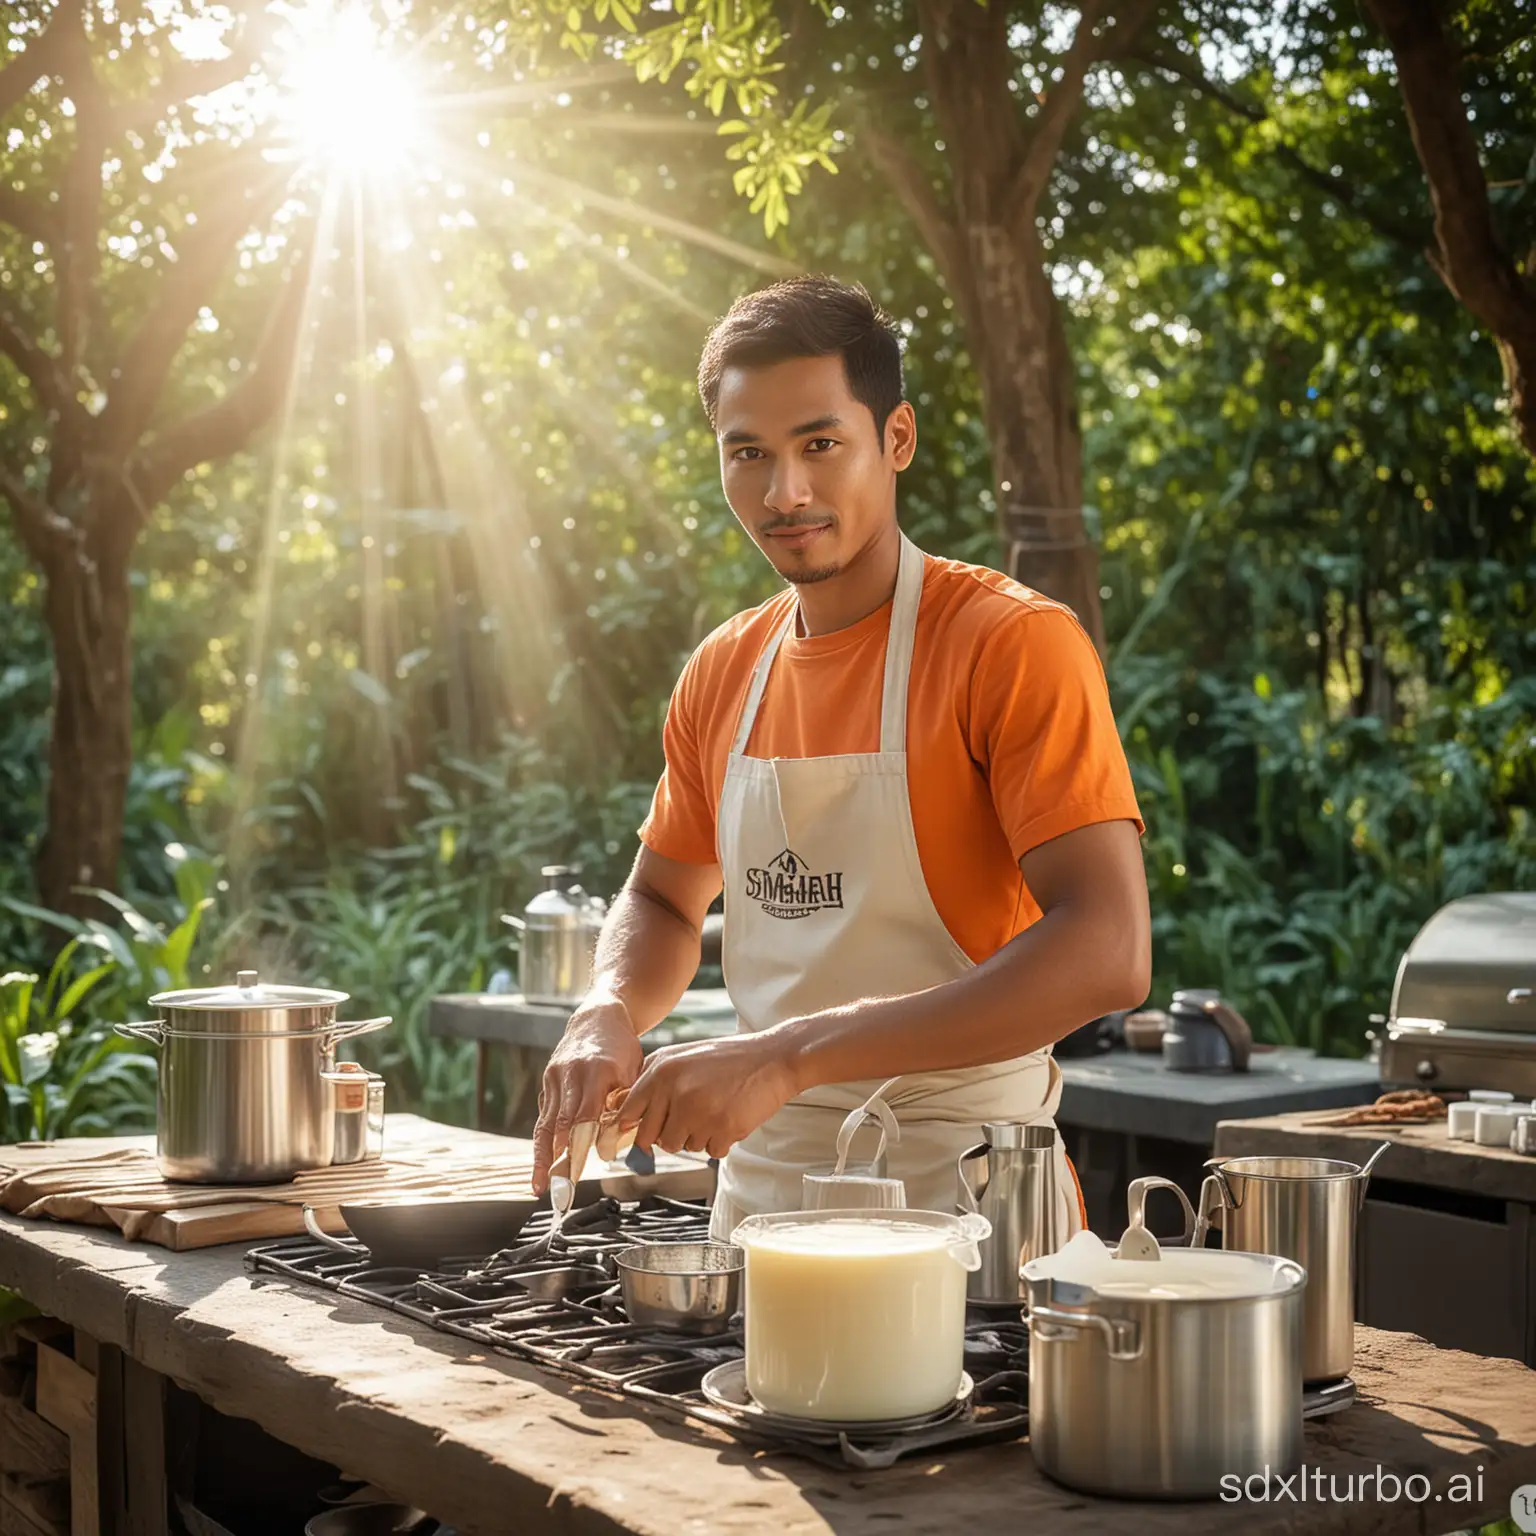 an Indonesian male bartender, orange t-shirt, apron that says "STMJ KAFFAH" is cooking milk in a modern outdoor kitchen, beautiful forest background with charming sunlight, Shot on Canon 6d, Iso : 1200, sS 1/400, F -4.5